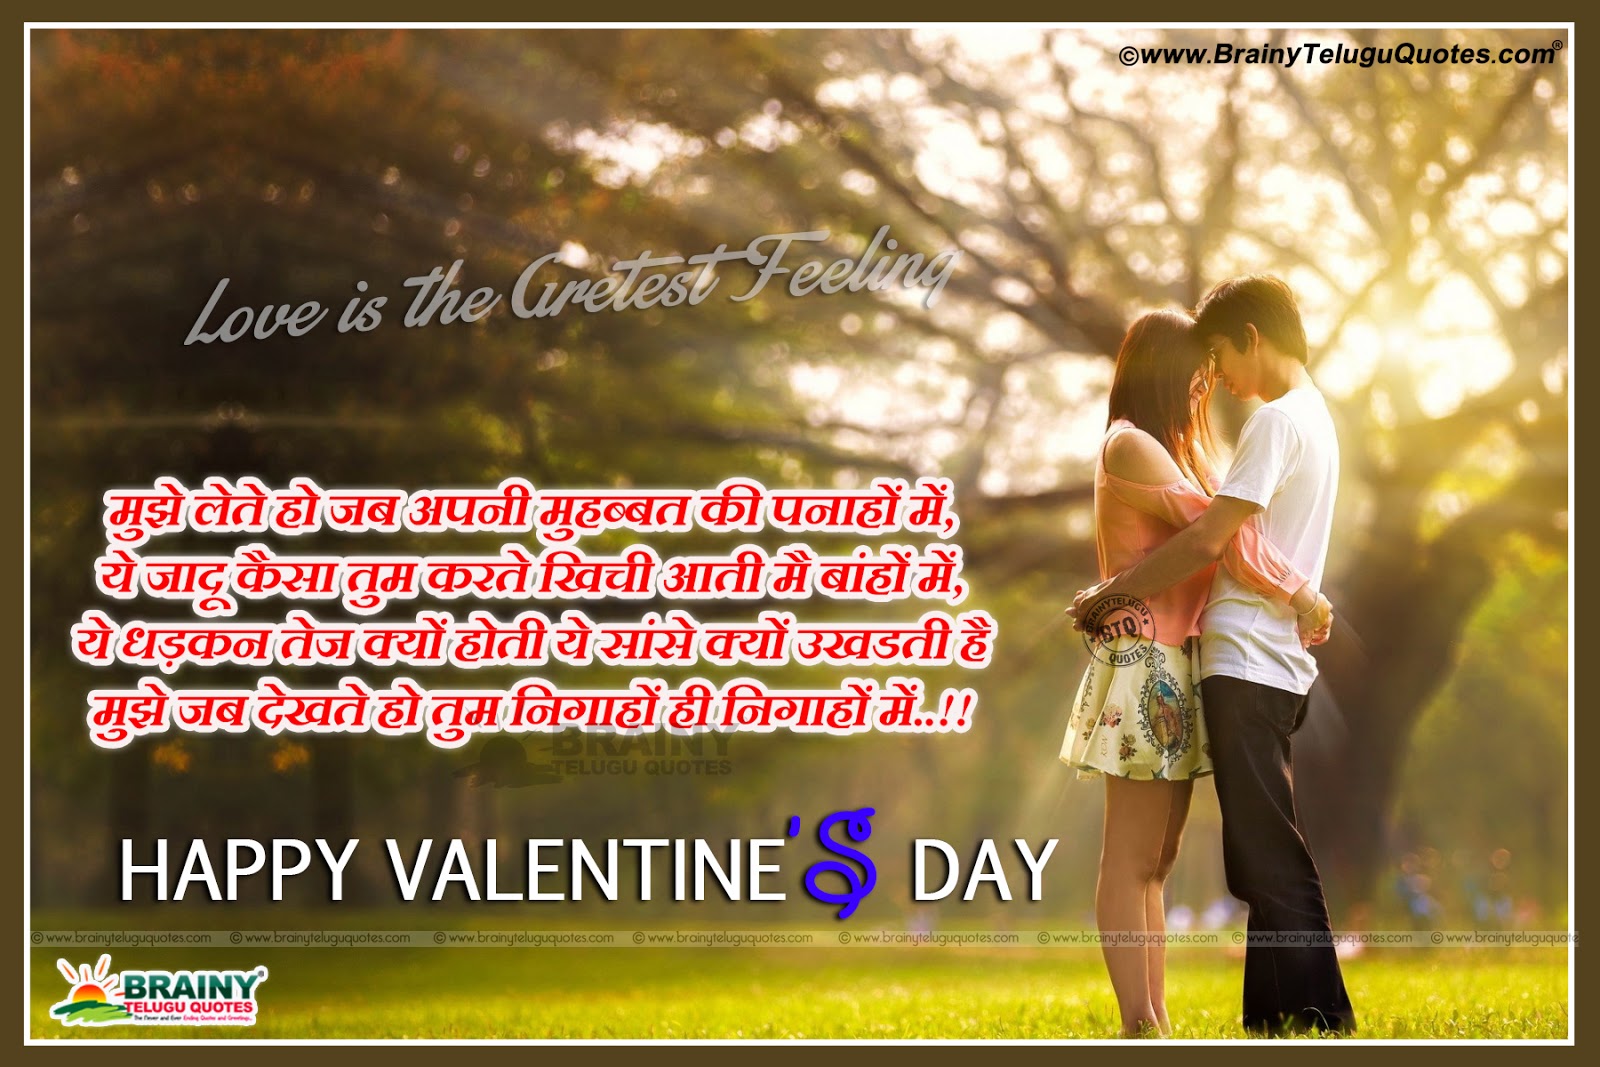 Happy Valentines Day Sms in Hindi, Touching Love Shayari for Her/Him